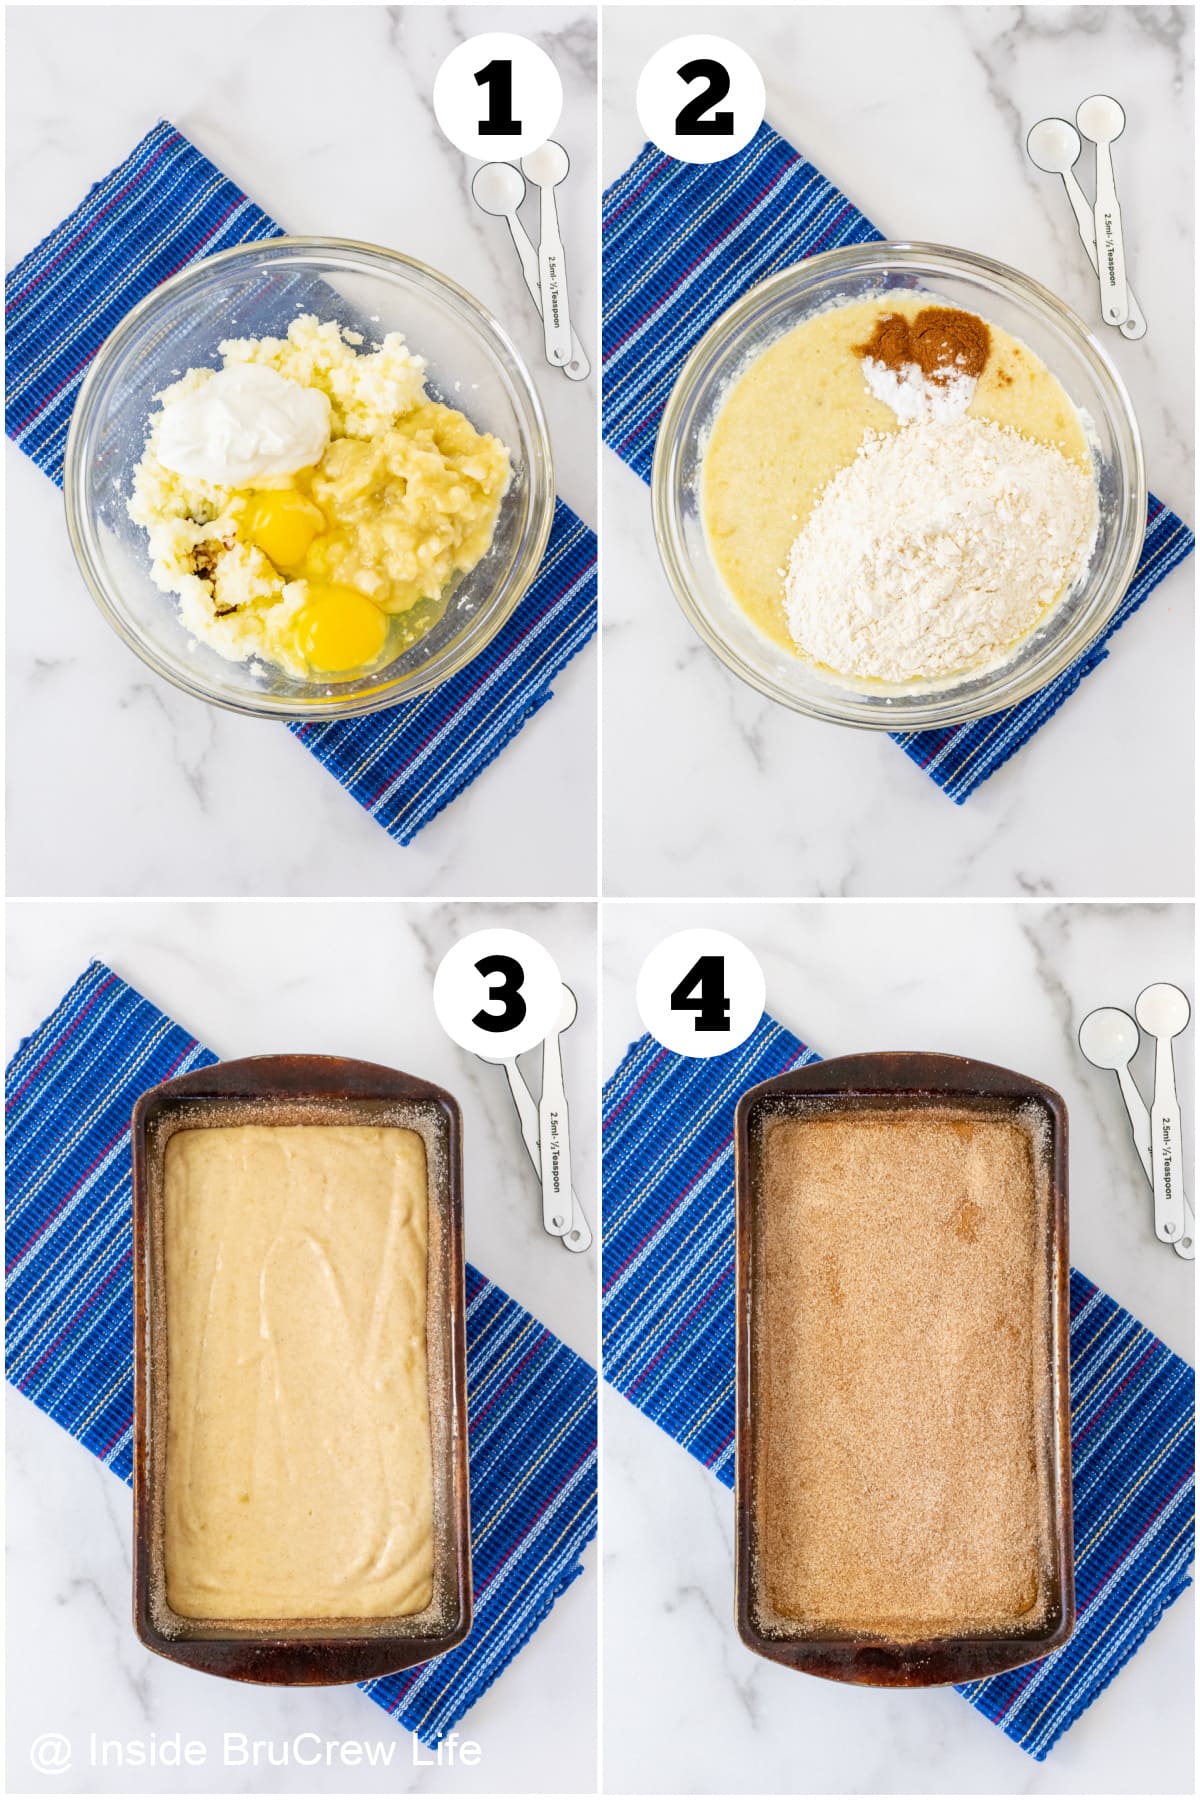 Four pictures collaged together showing how to make a sweet bread.